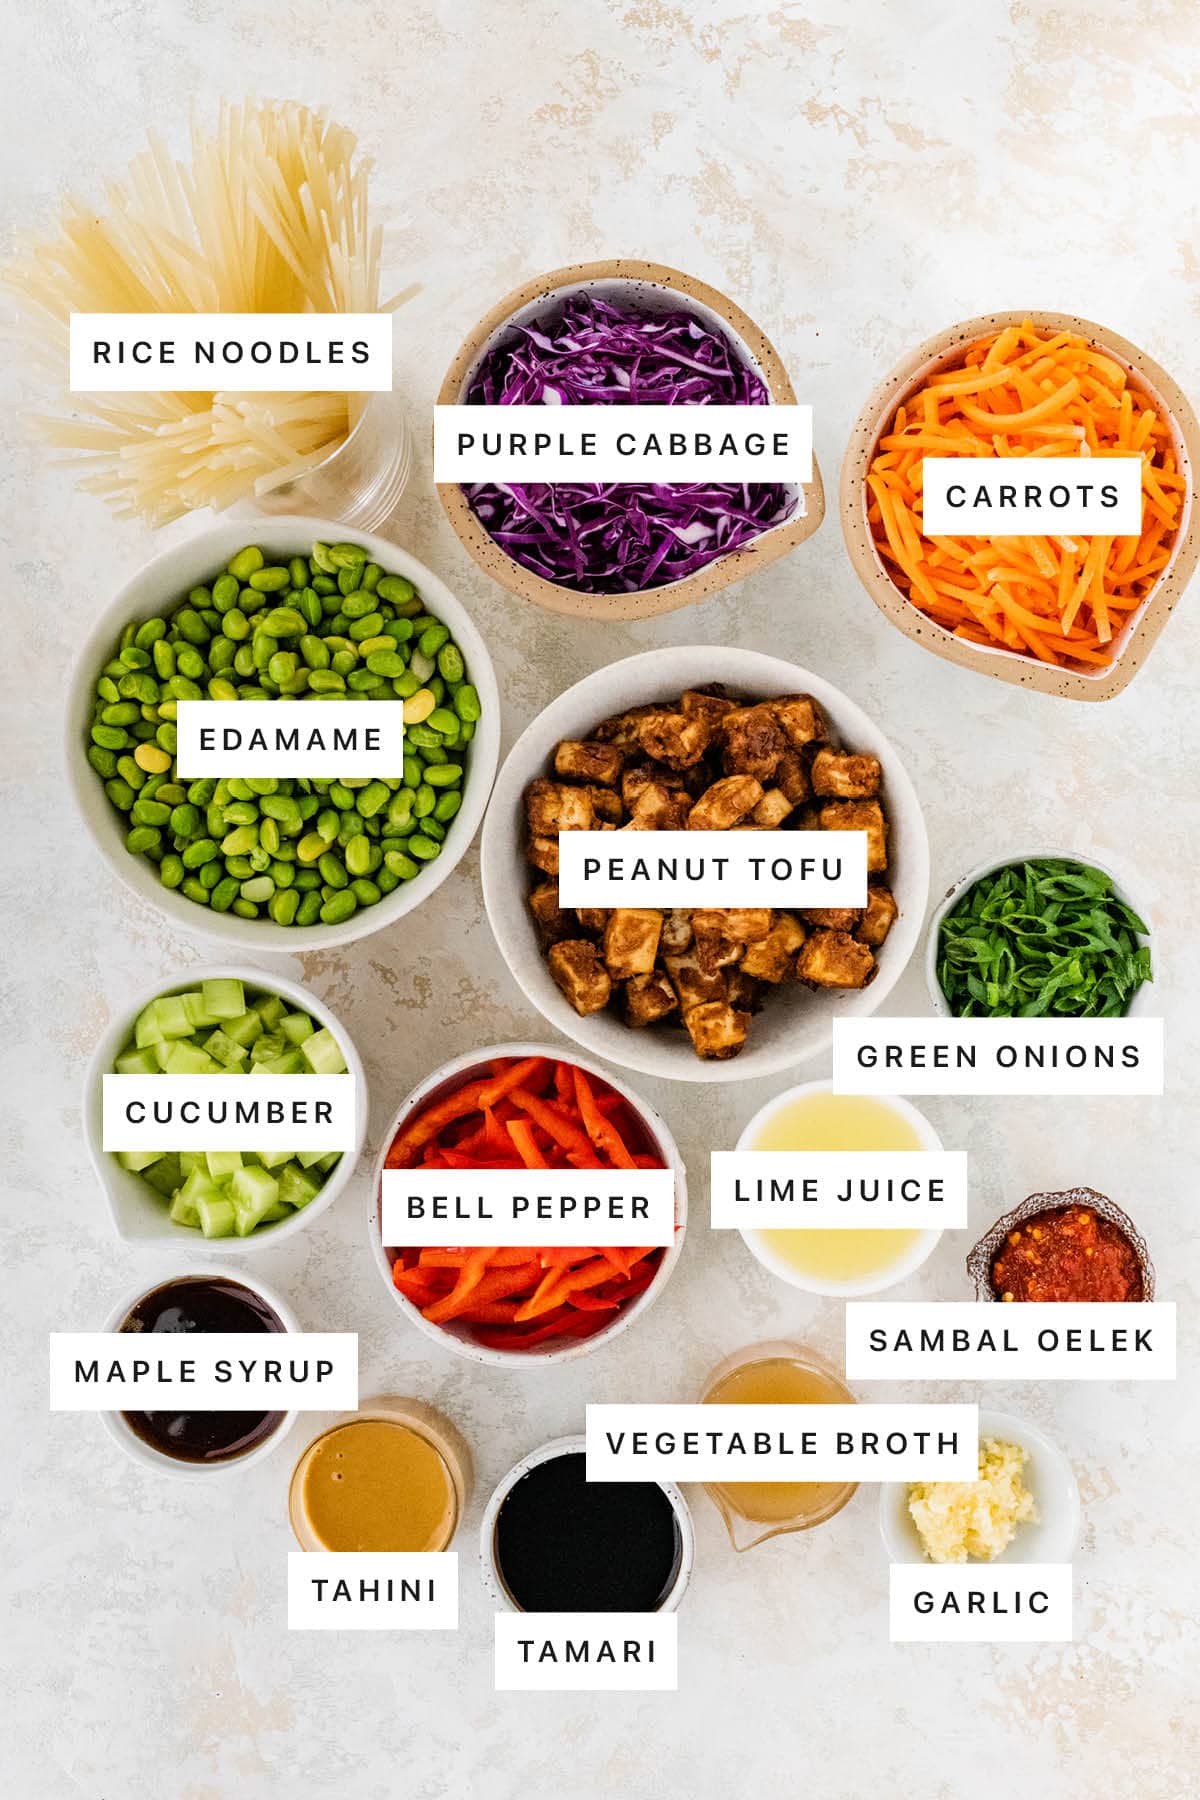 Ingredients measured out to make Asian Noodle Bowl (for Meal Prep): rice noodles, purple cabbage, carrots, edamame, peanut tofu, green onions, cucumber, bell pepper, lime juice, sambal oelek, maple syrup, tahini, tamari, vegetable broth and garlic.